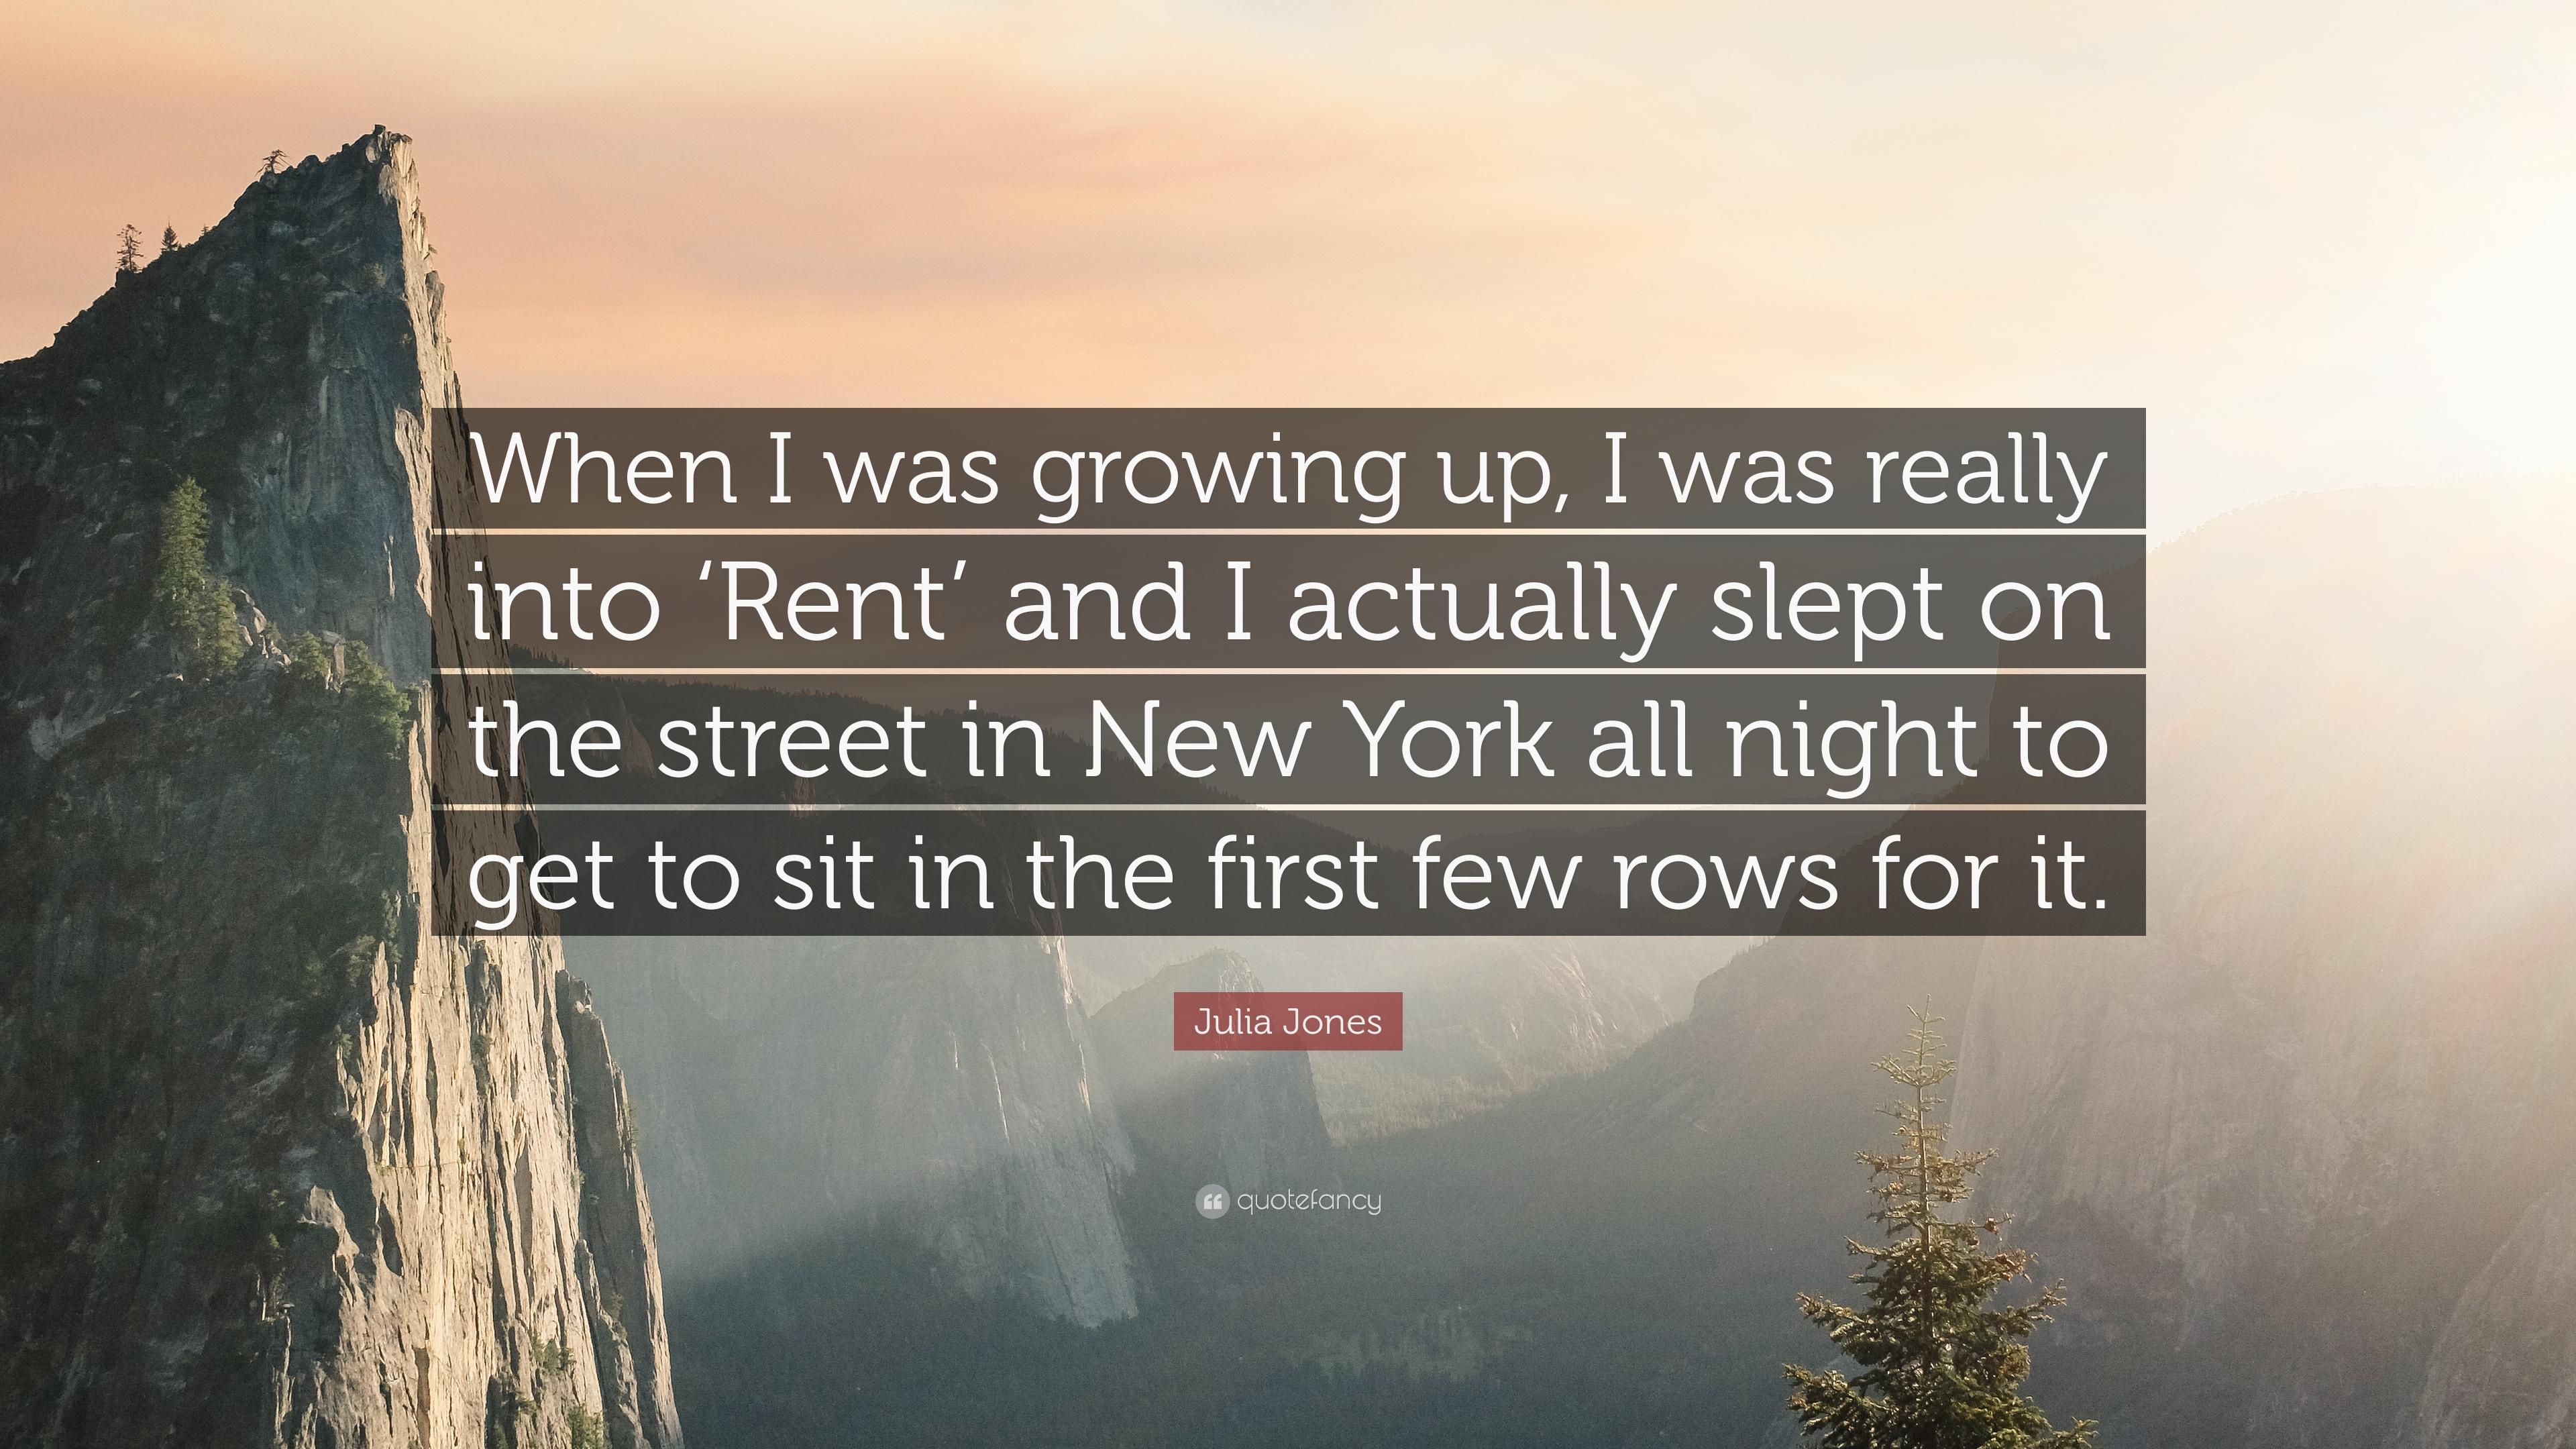 Julia Jones Quote: “When I was growing up, I was really into